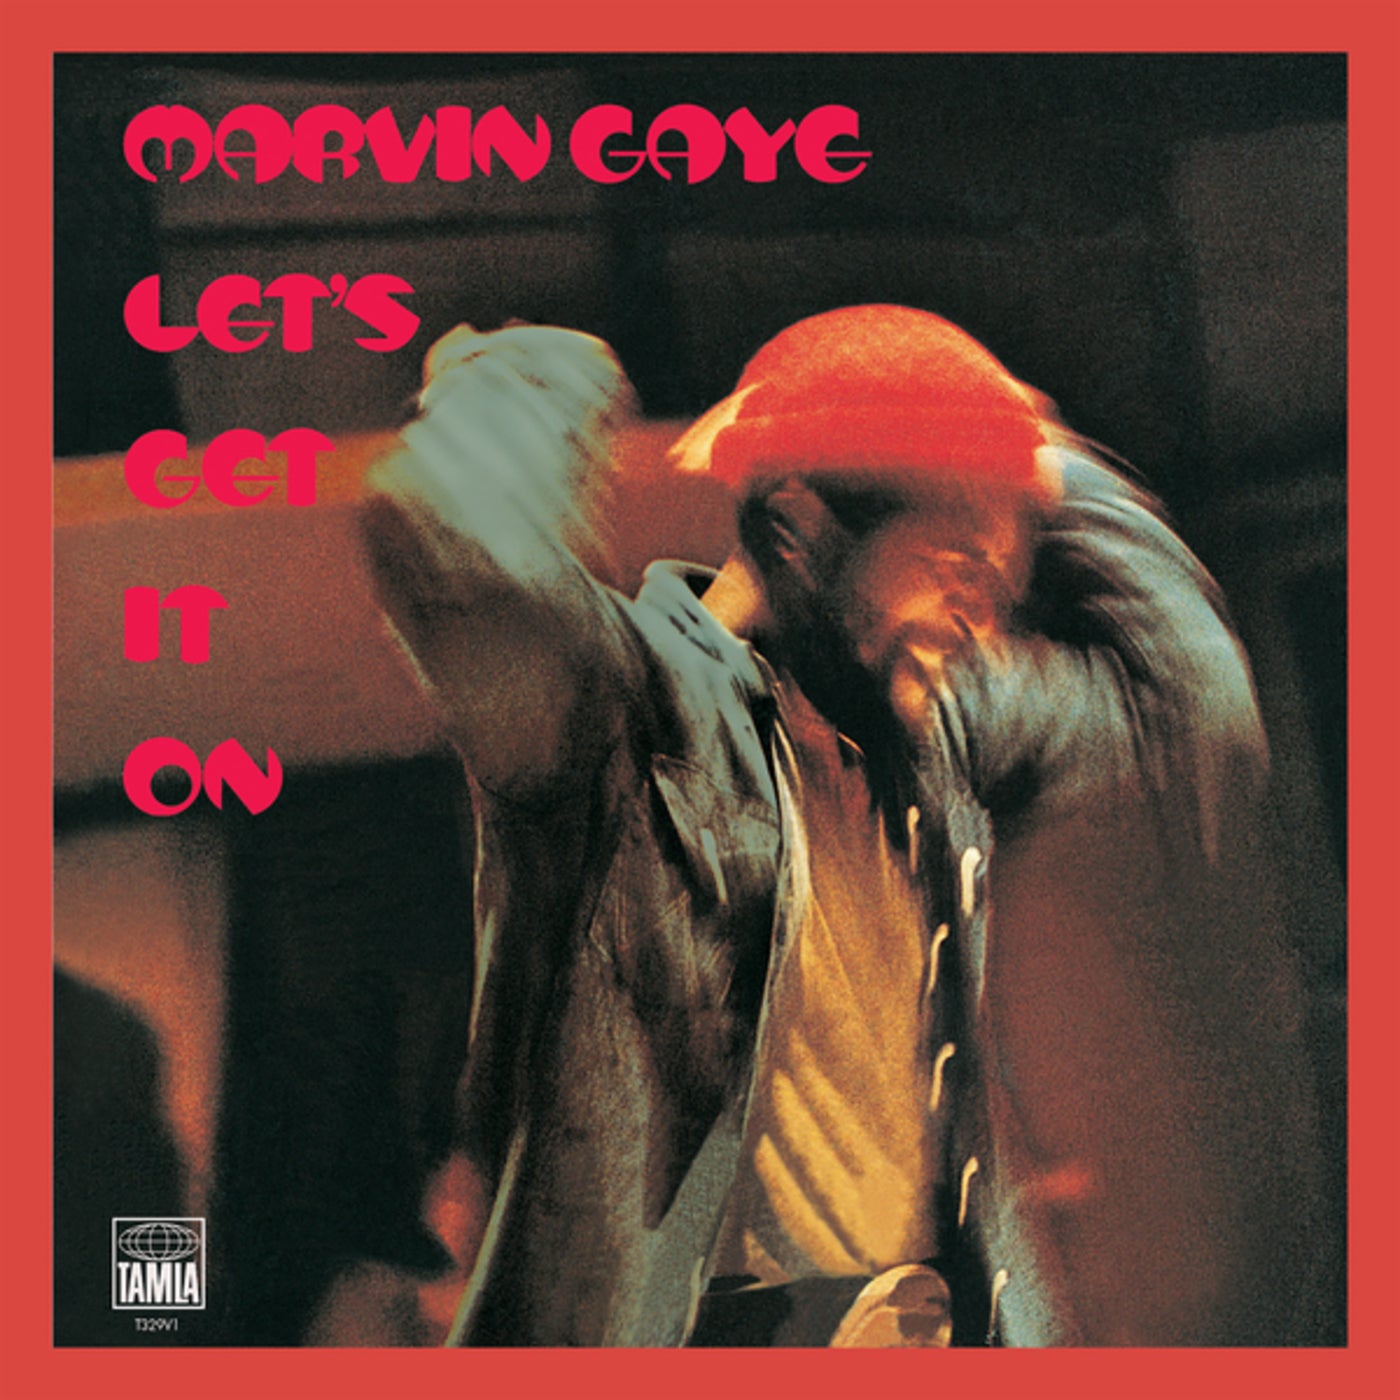 BPM and key for Ain't No Mountain High Enough by Marvin Gaye